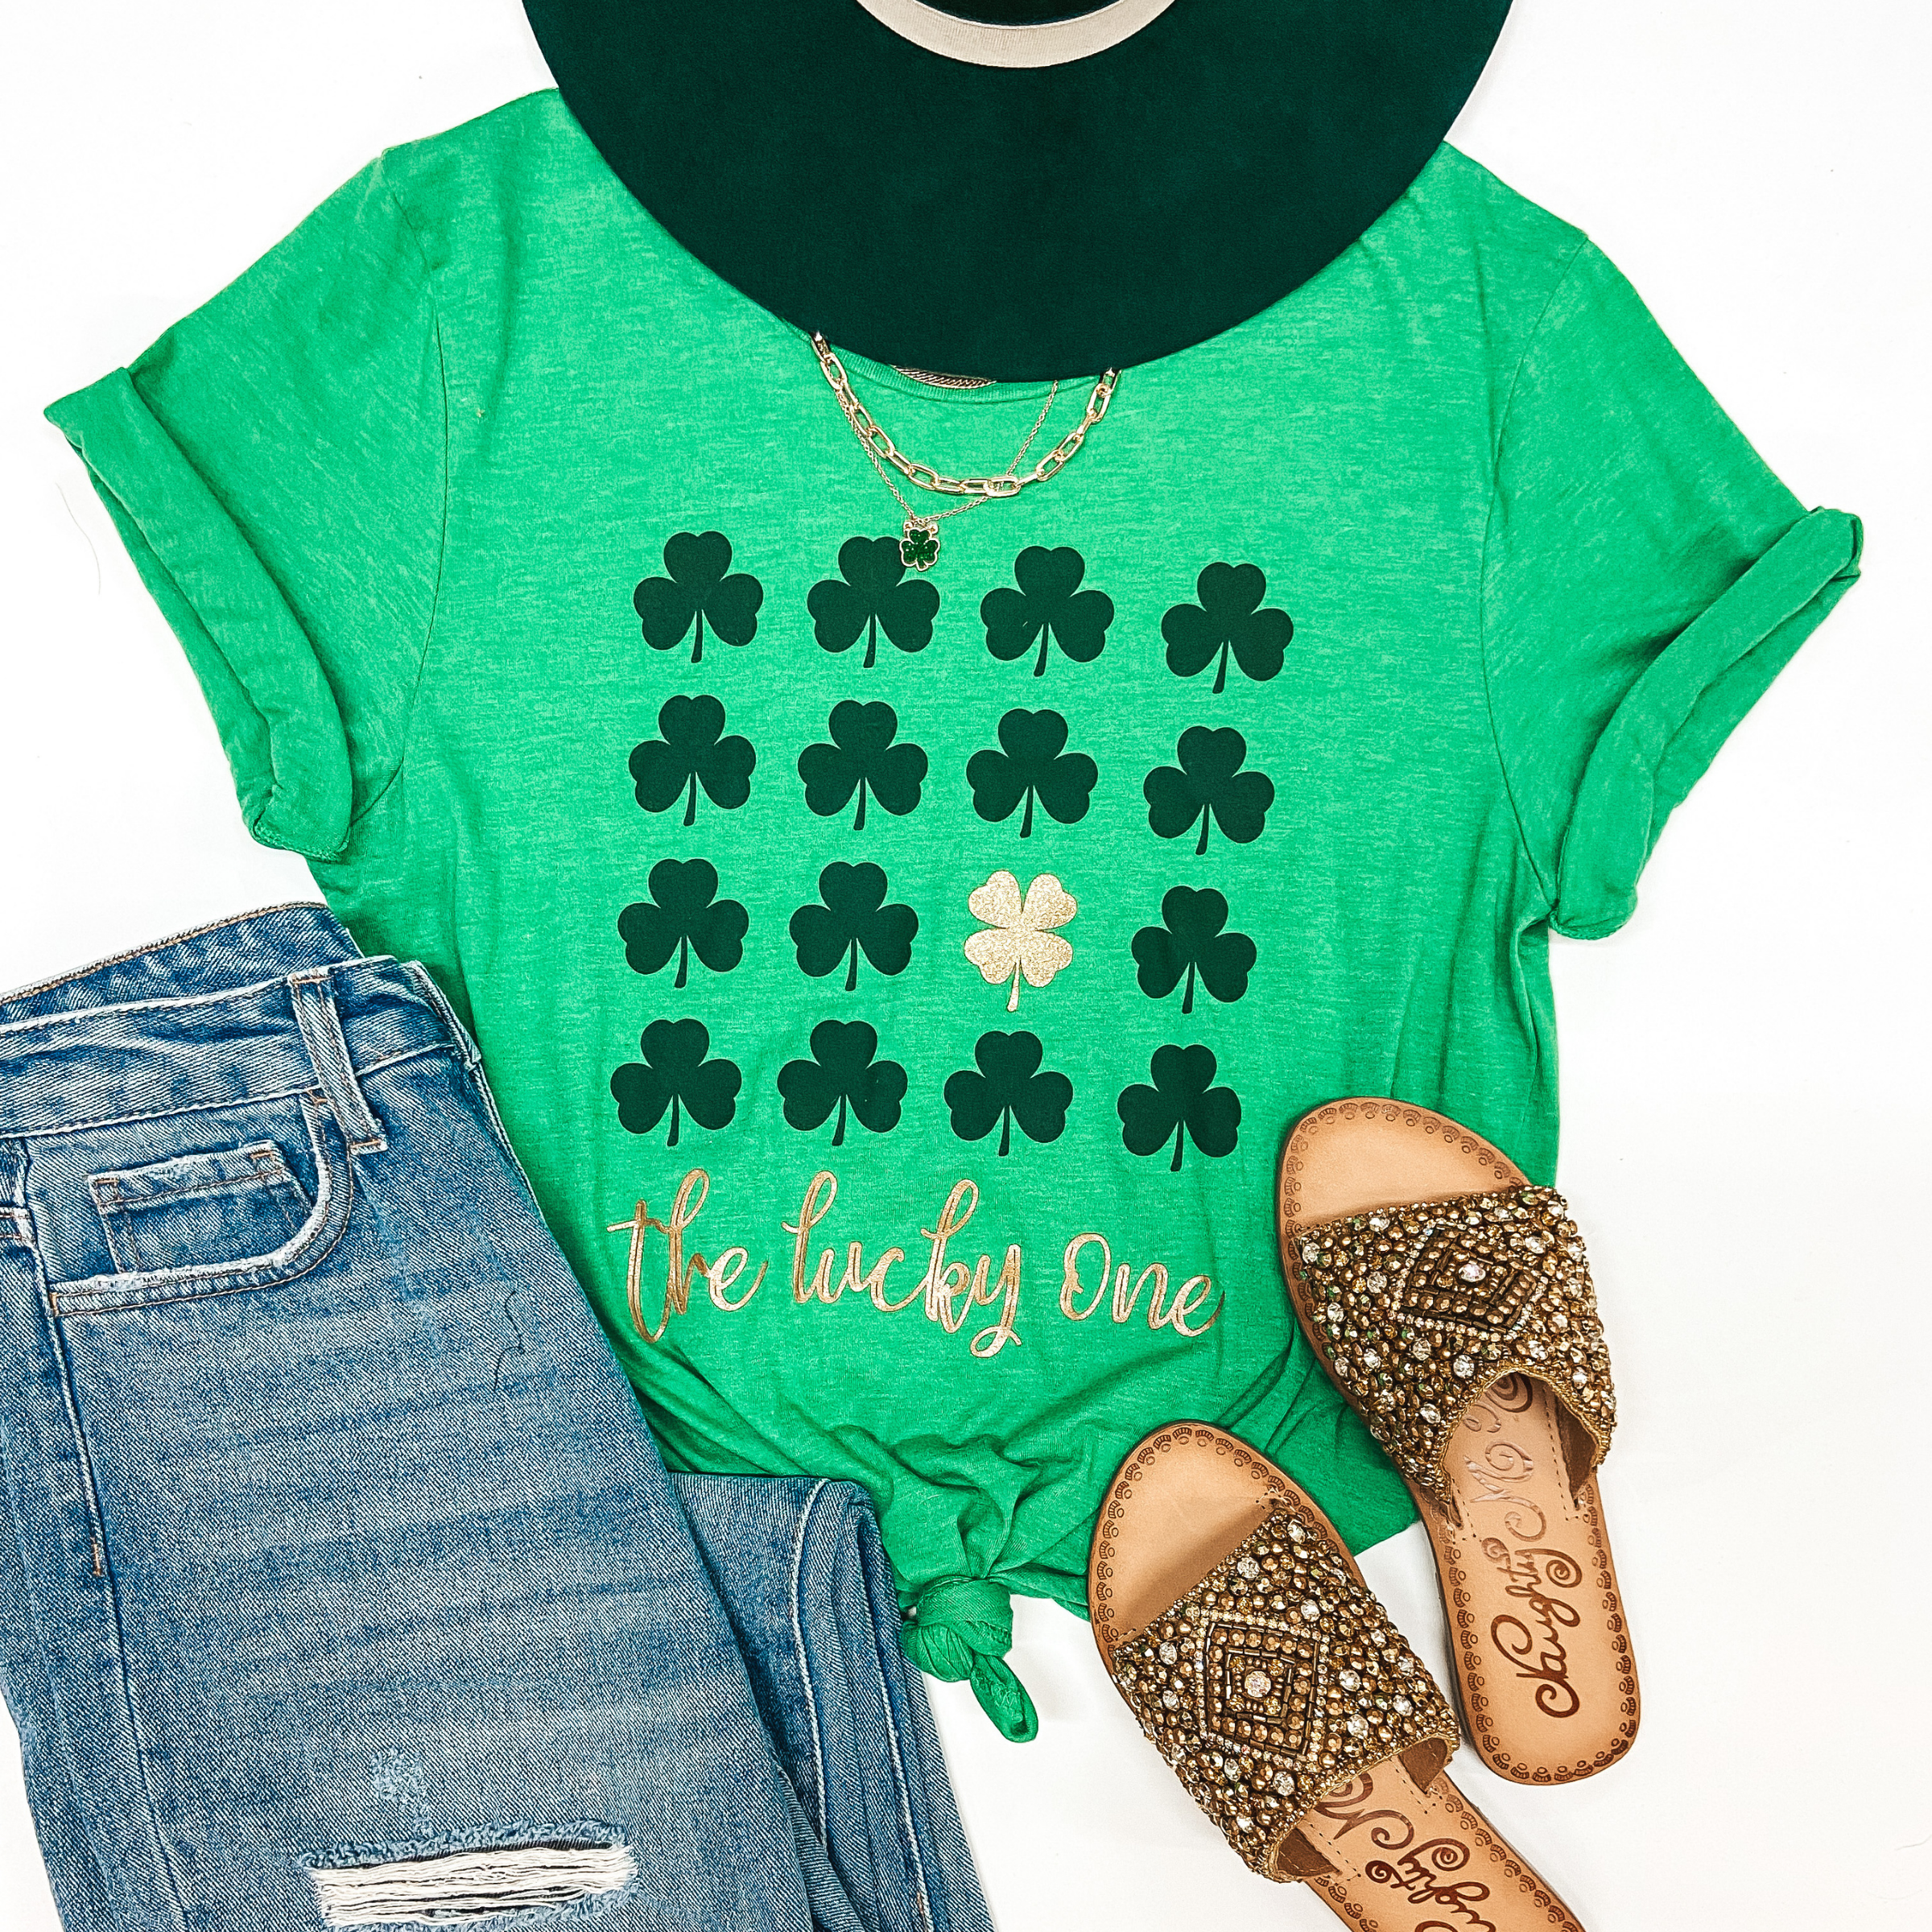 A green graphic tee that has dark green clovers and gold writing that says "The Lucky Ones"